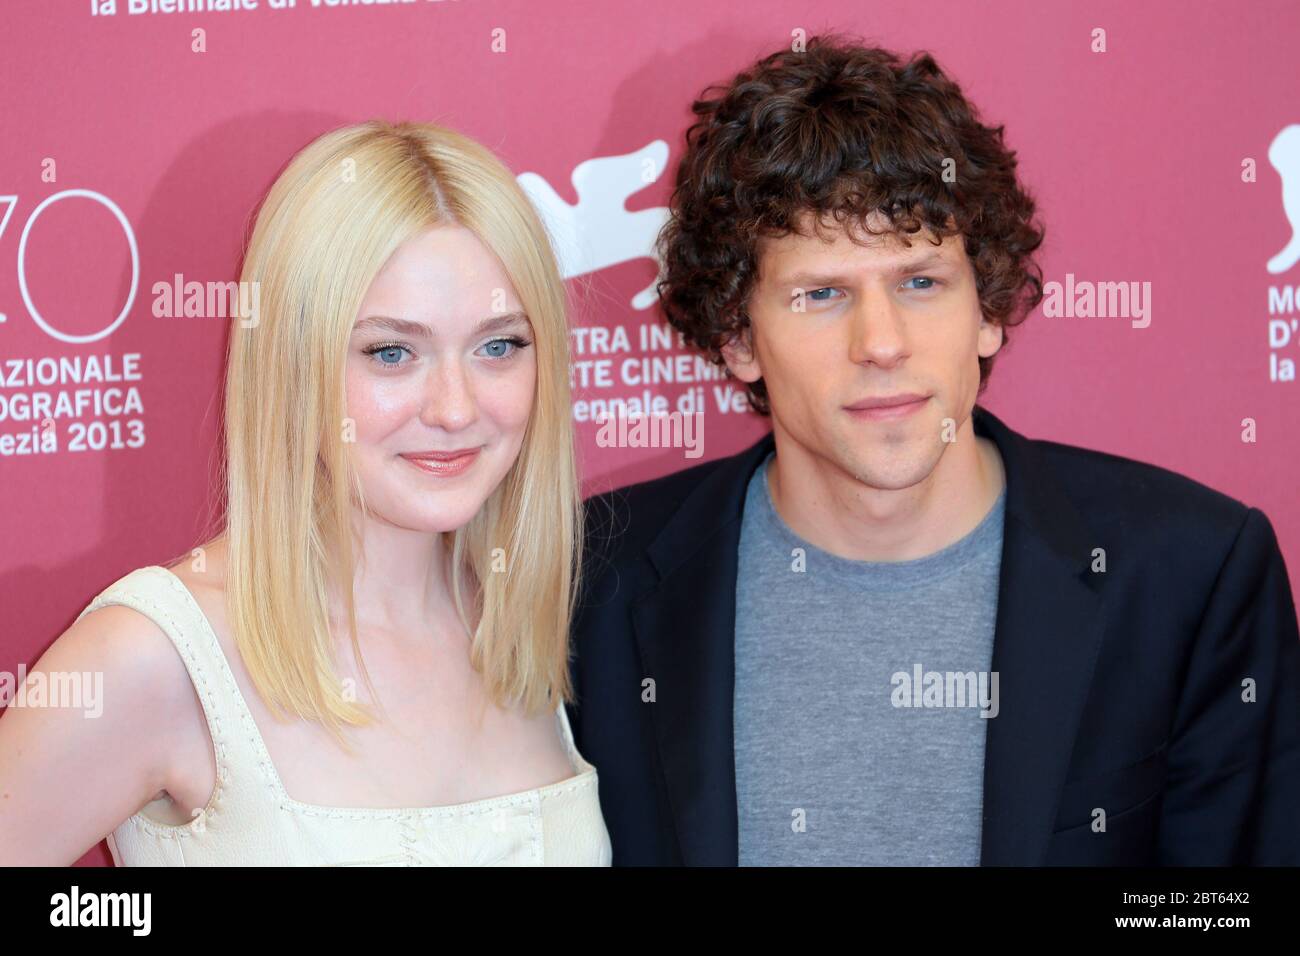 VENICE, ITALY - AUGUST 31: Dakota Fanning and Jesse Eisenberg attends 'Night Moves' Photocall during the 70th Venice Film Festival on August 31, 2013 Stock Photo